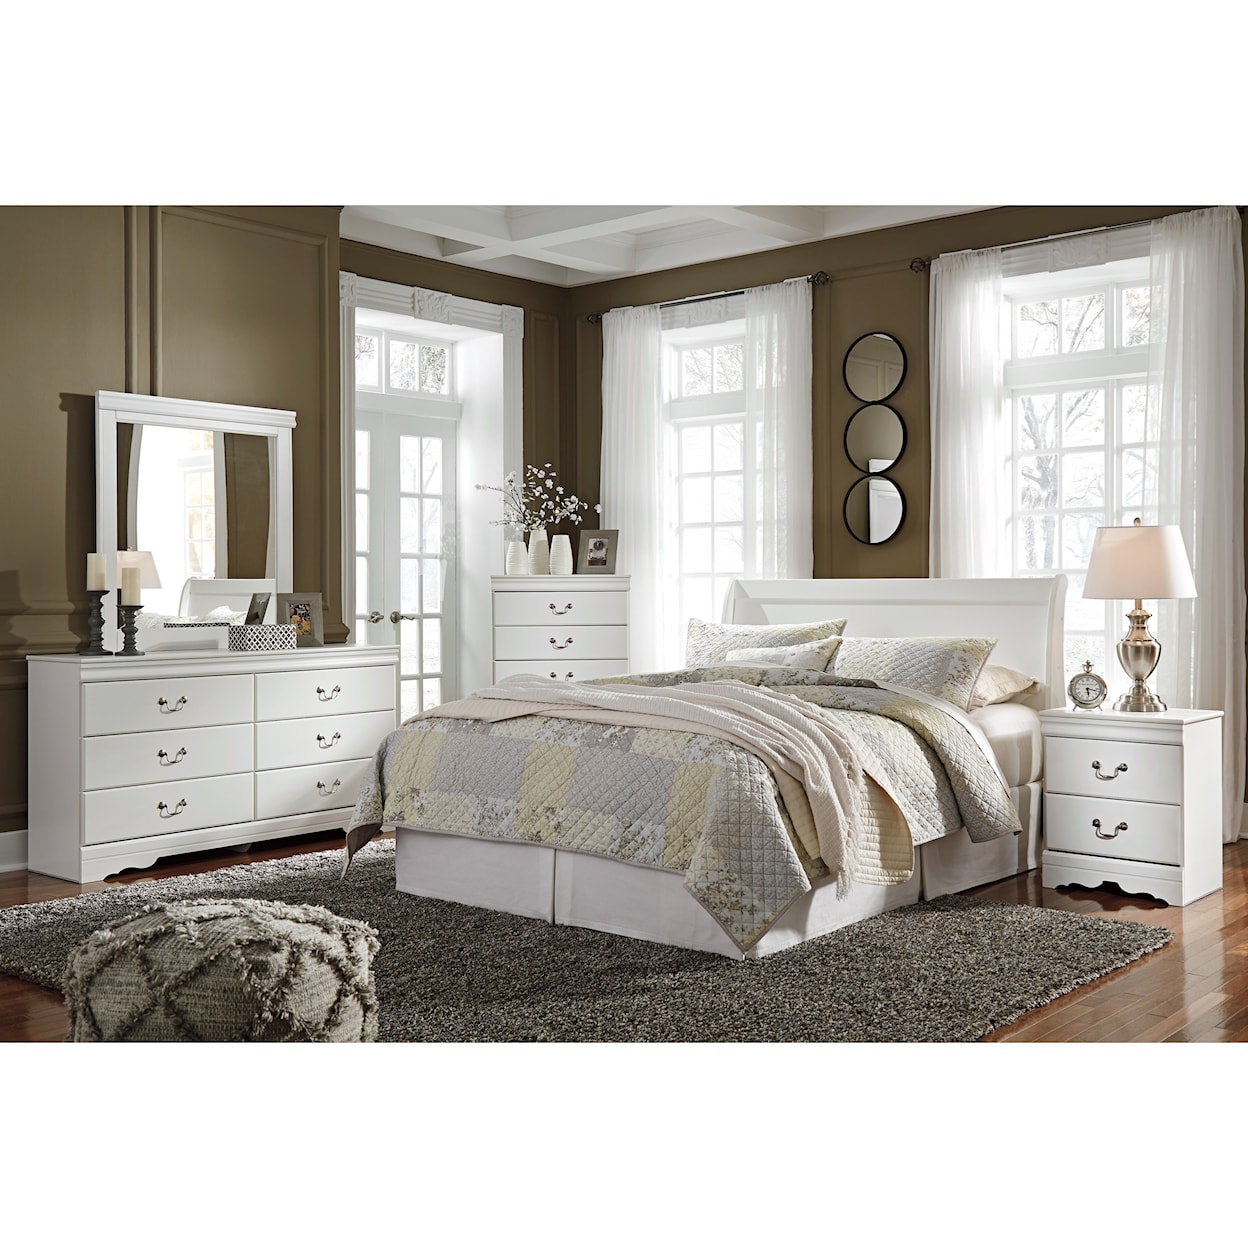 Signature Design by Ashley Anarasia Queen Bedroom Group